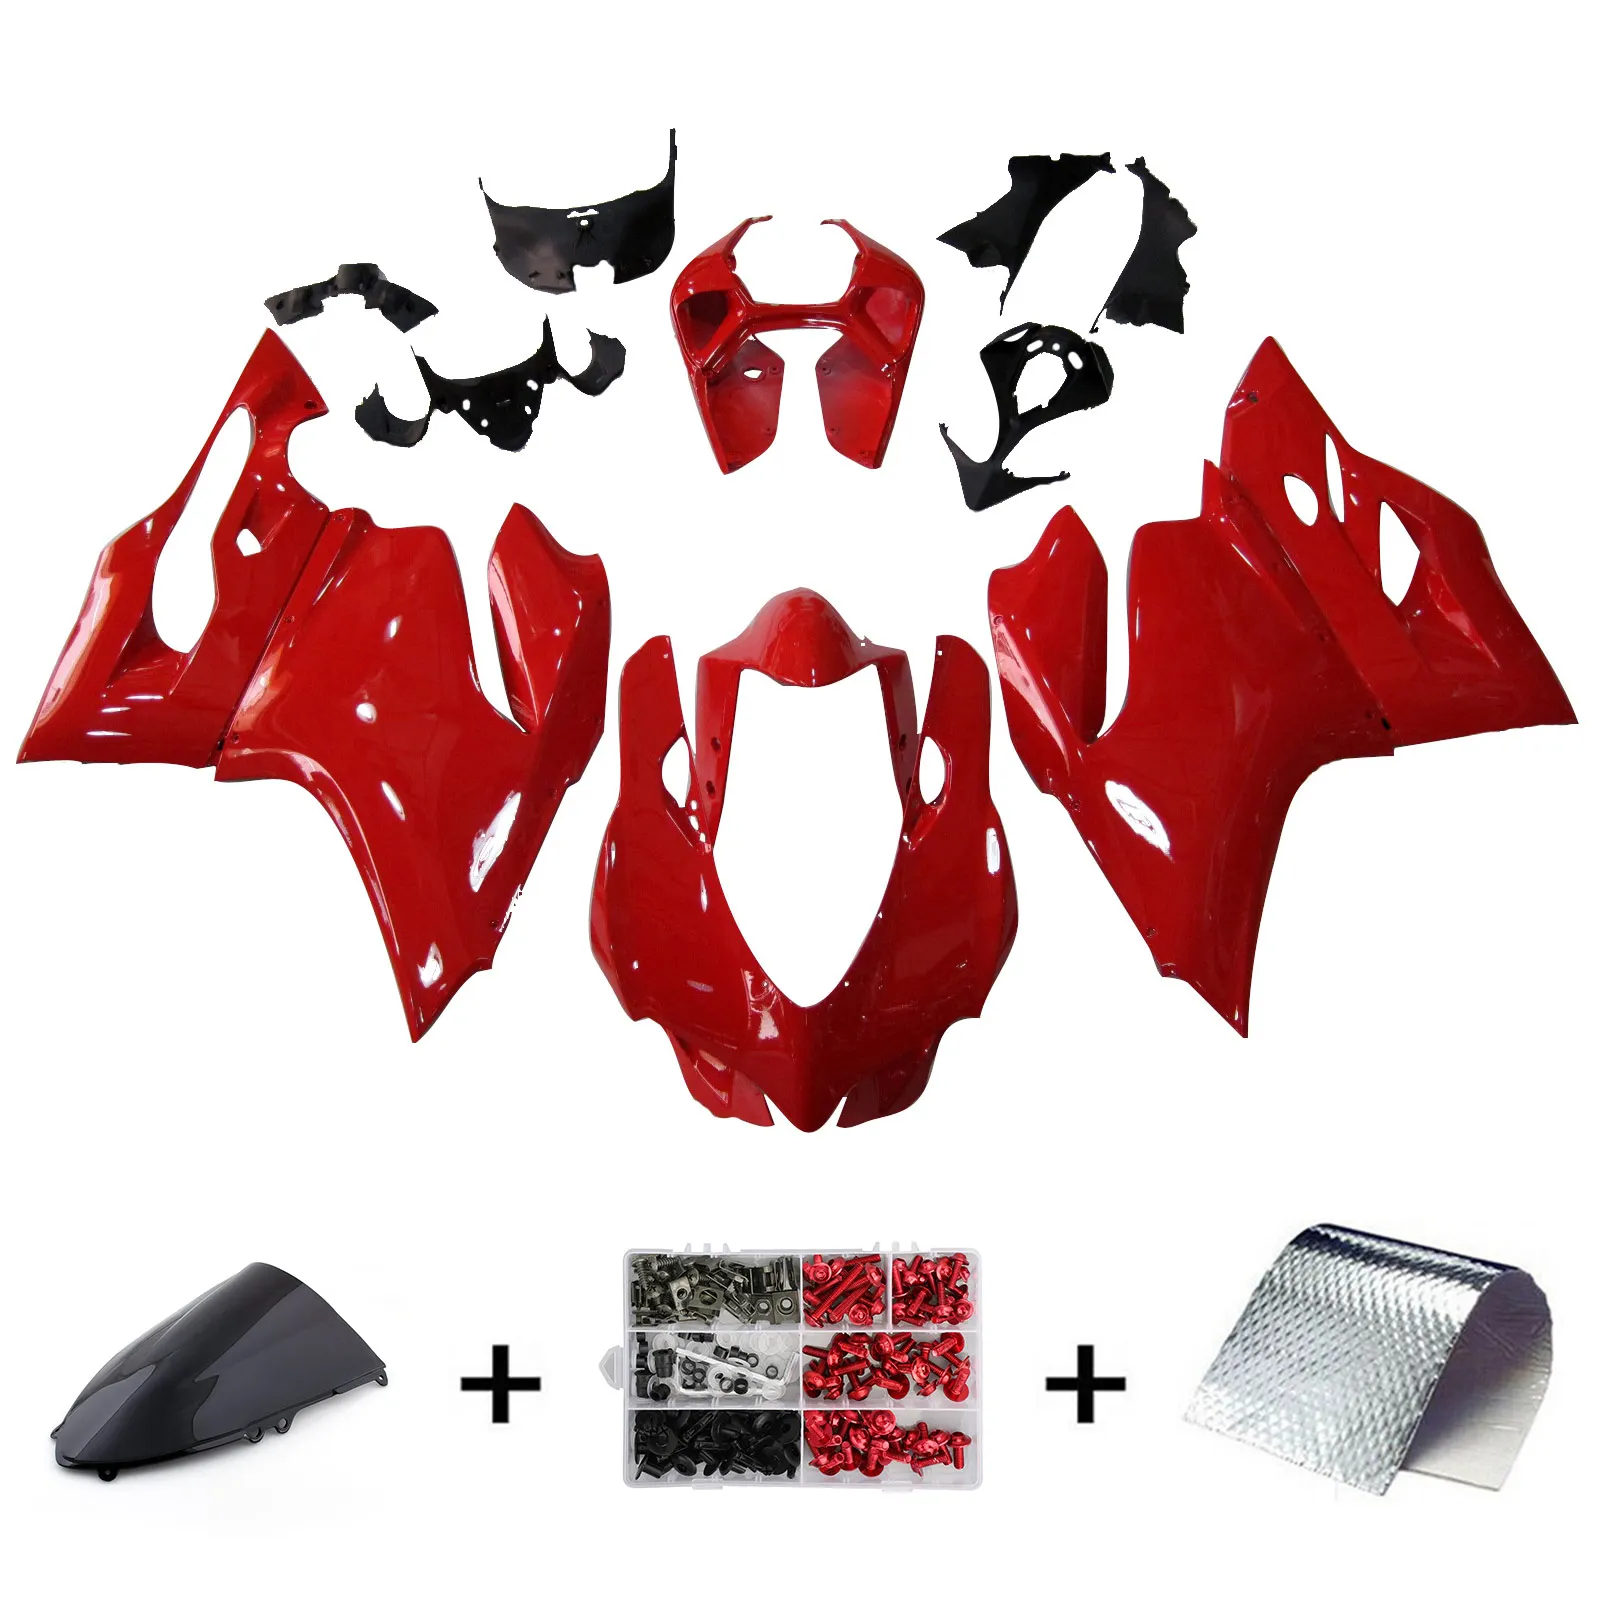 

Customized Fairing Injection ABS Plastic Kit Red White For Ducati 1199/899 2012 2013 2014 With Windscreen and Bolt Set